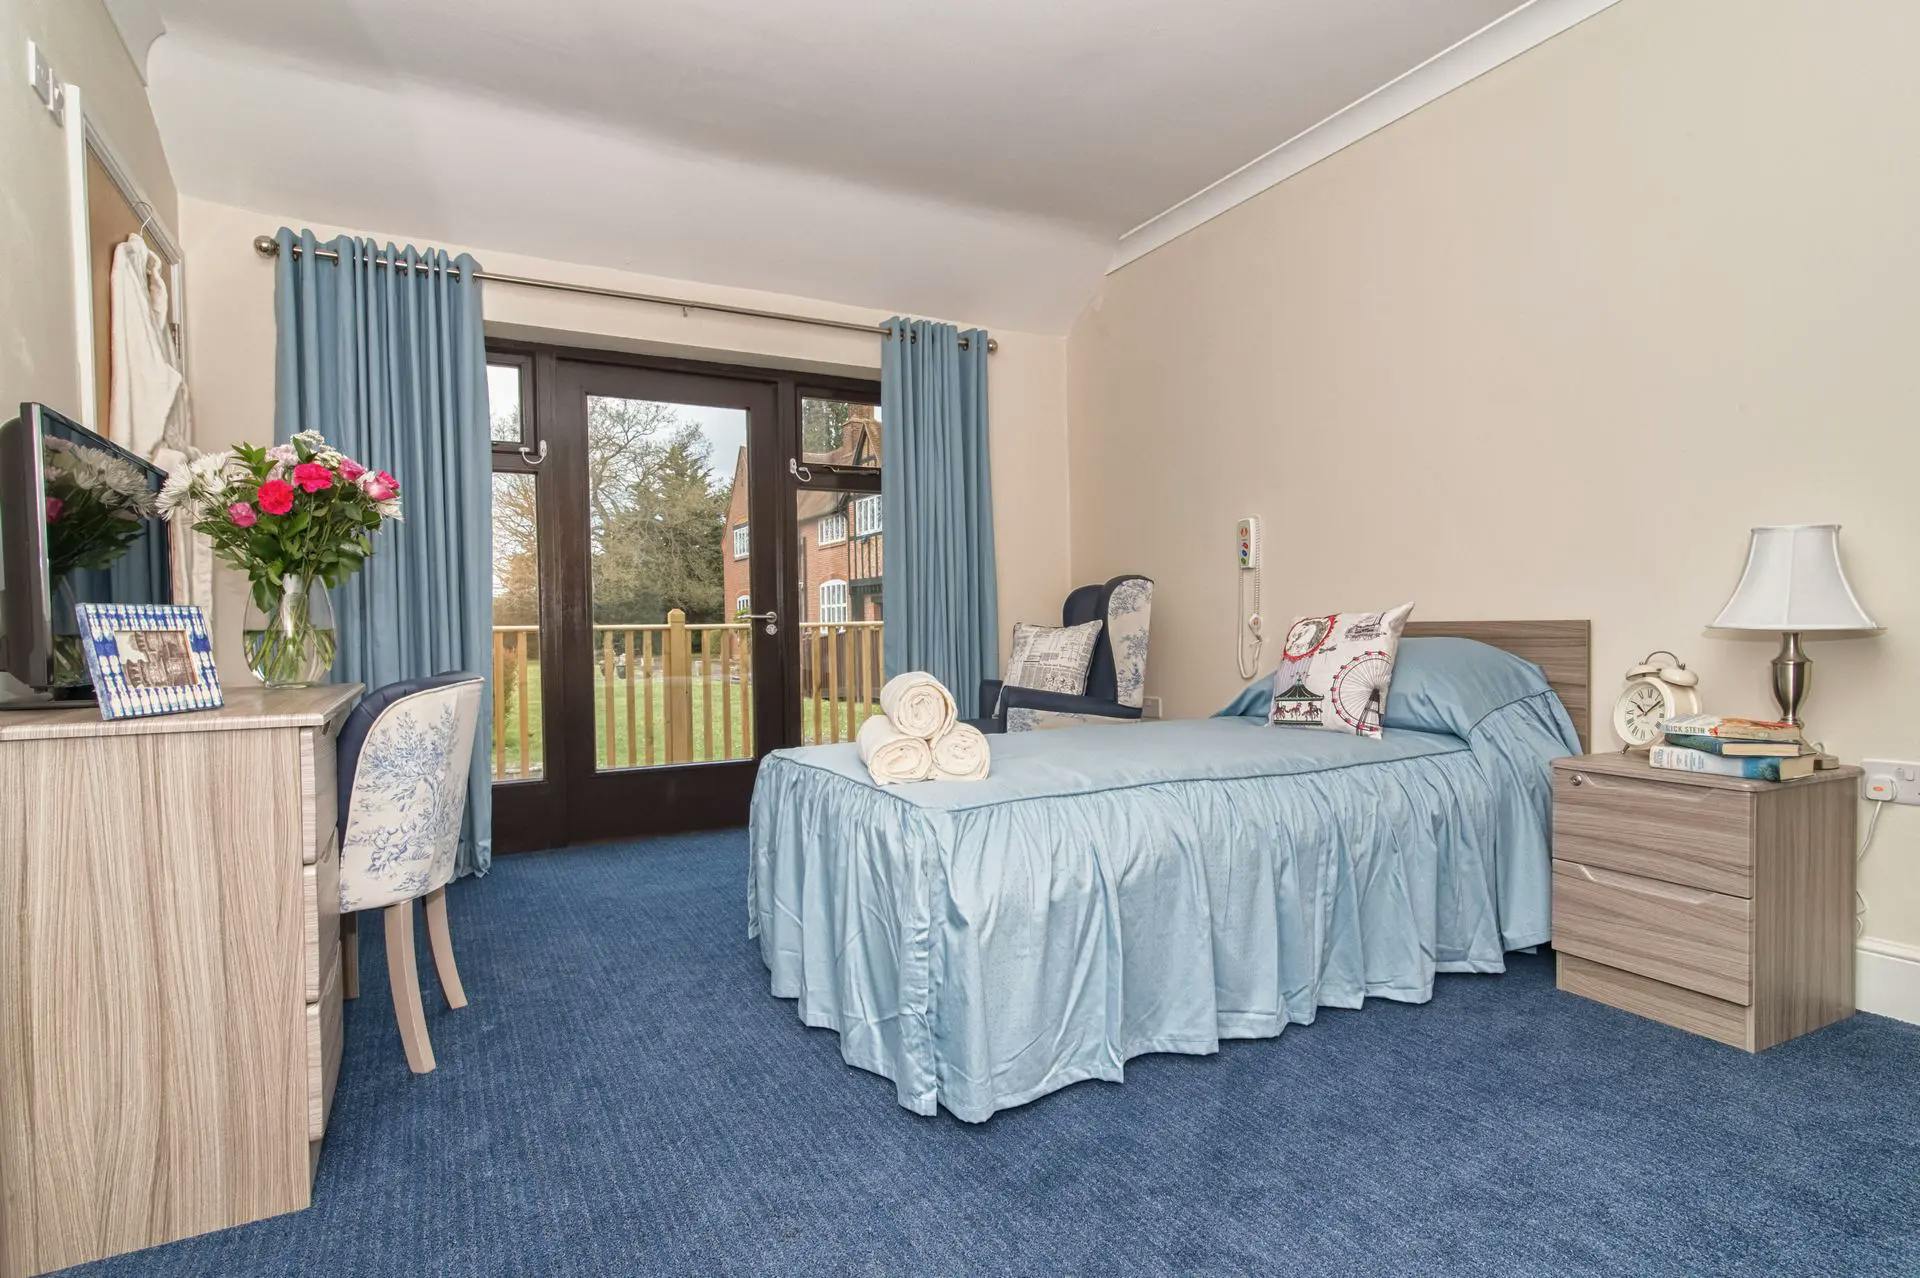 Bedroom at Denham Manor Care Home in Buckinghamshire, South East